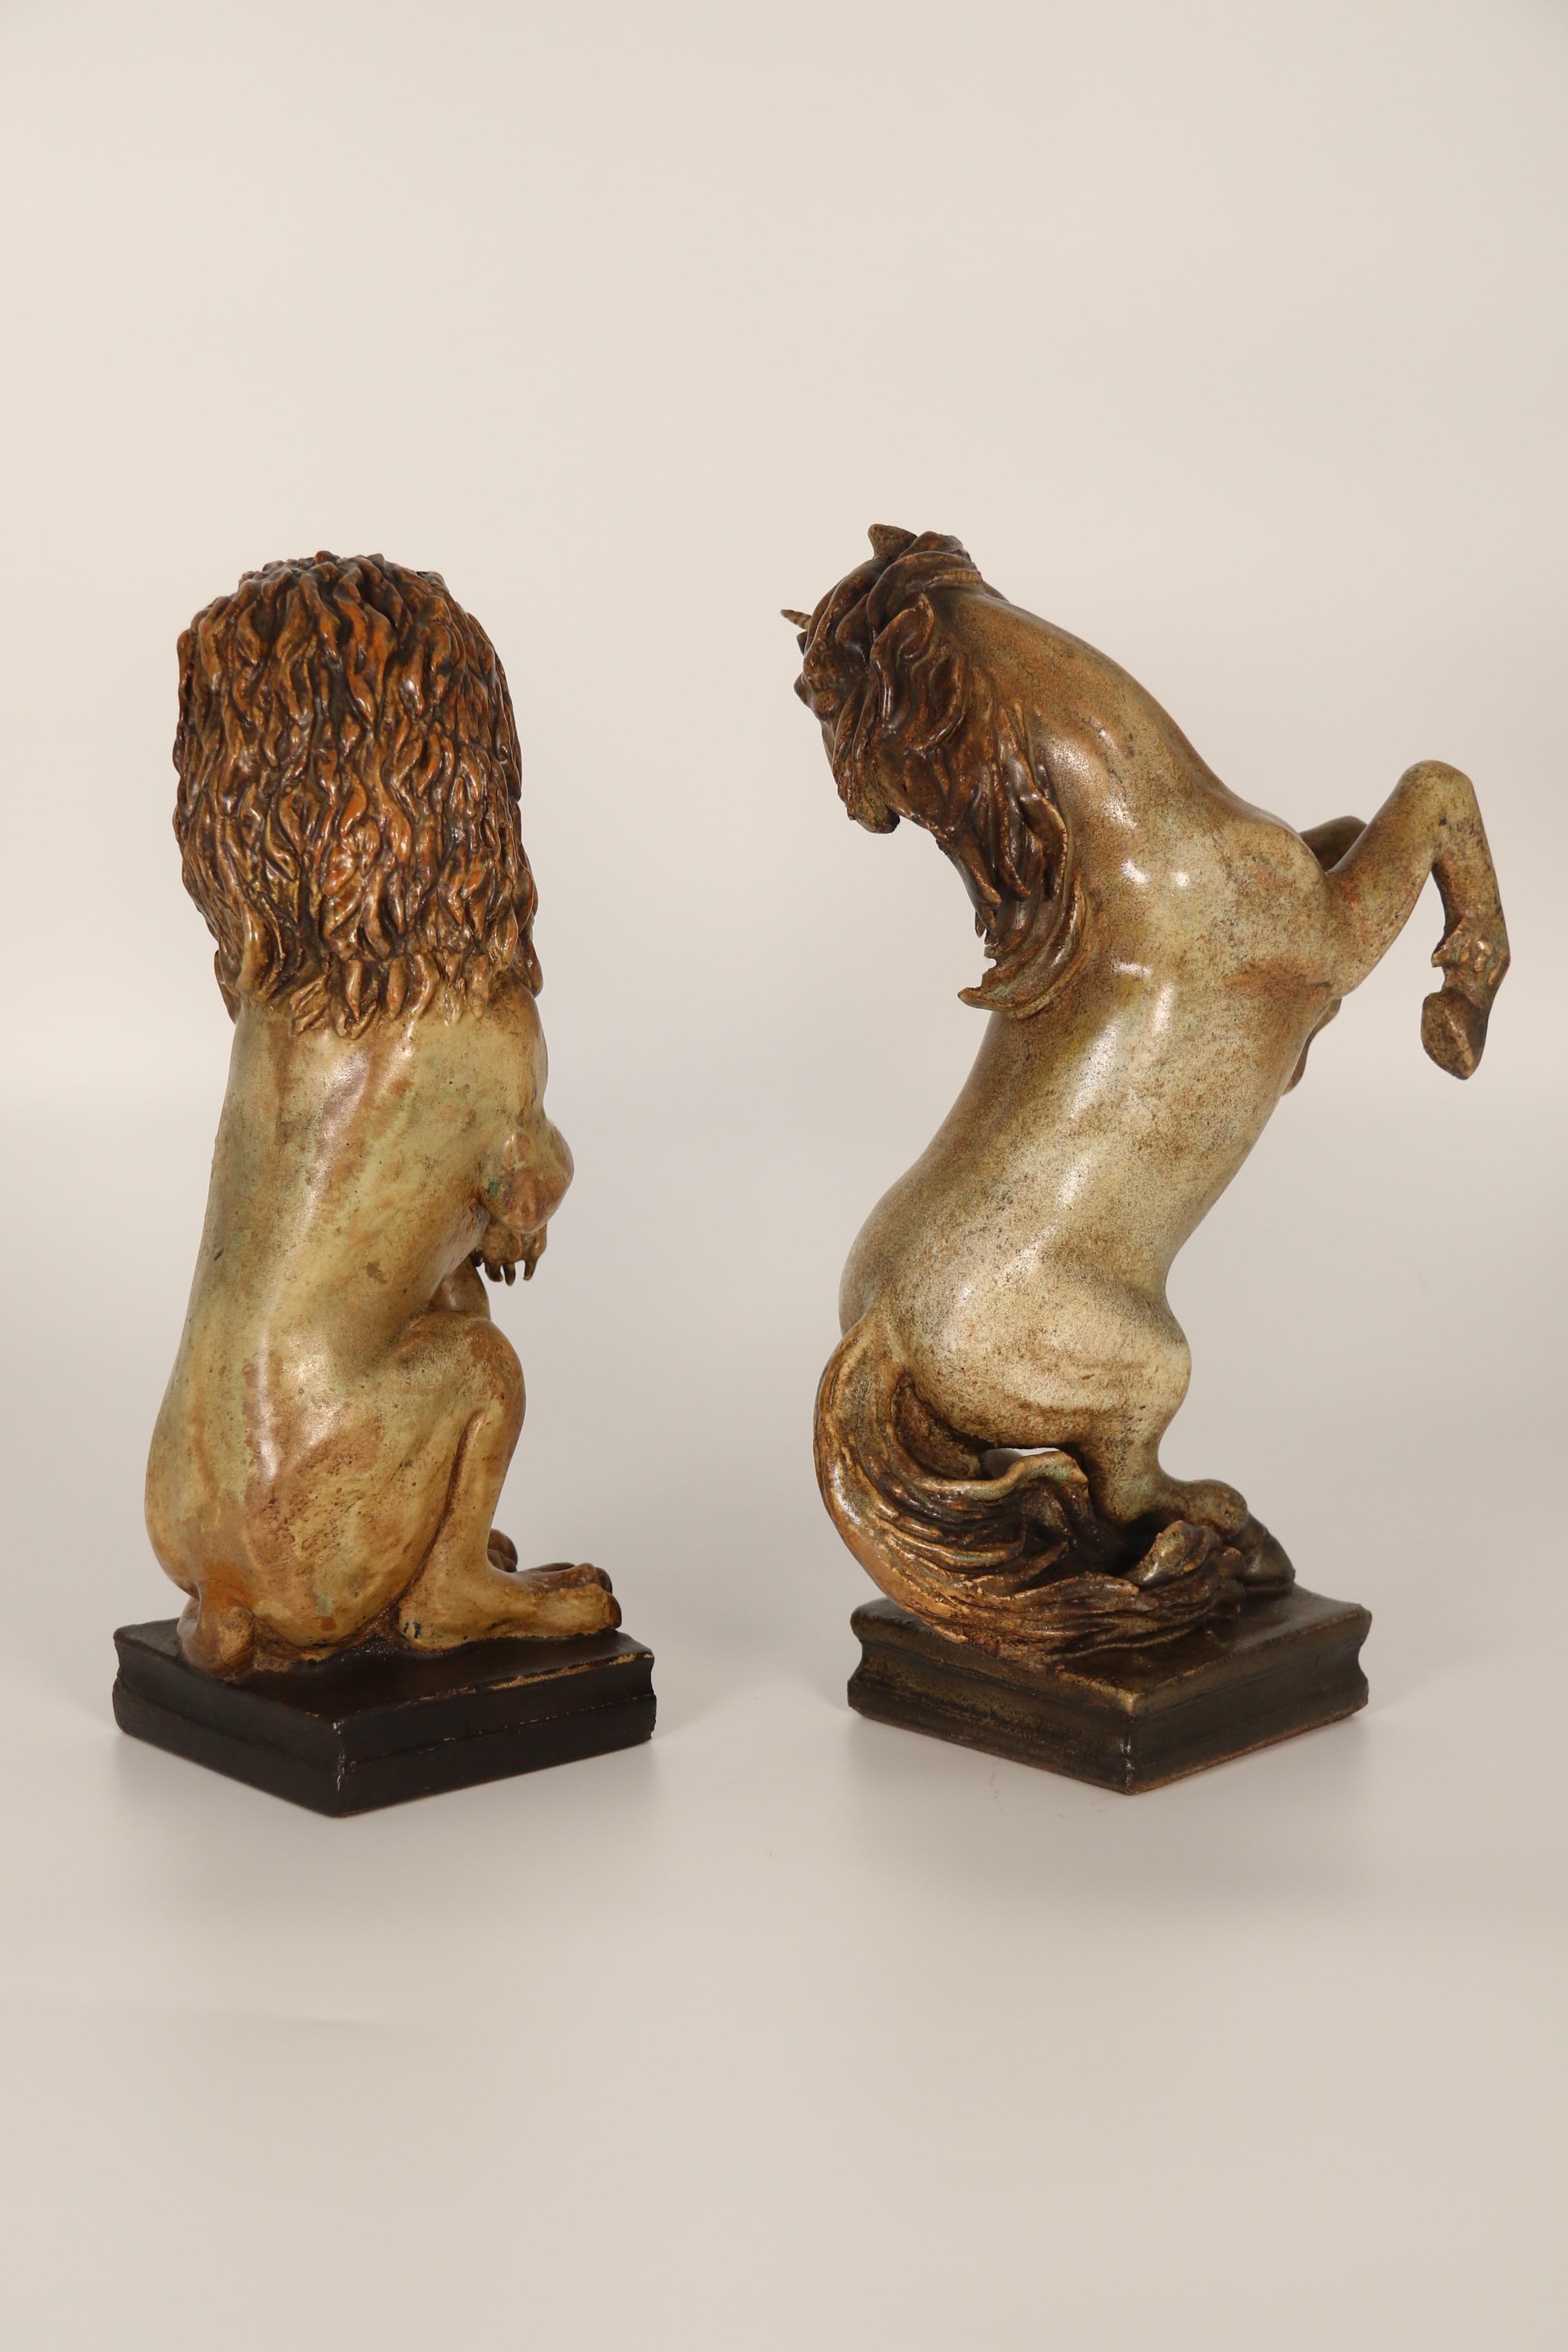 Hand-Crafted A pair of art pottery hand sculpted figures of a heraldic lion and unicorn. For Sale